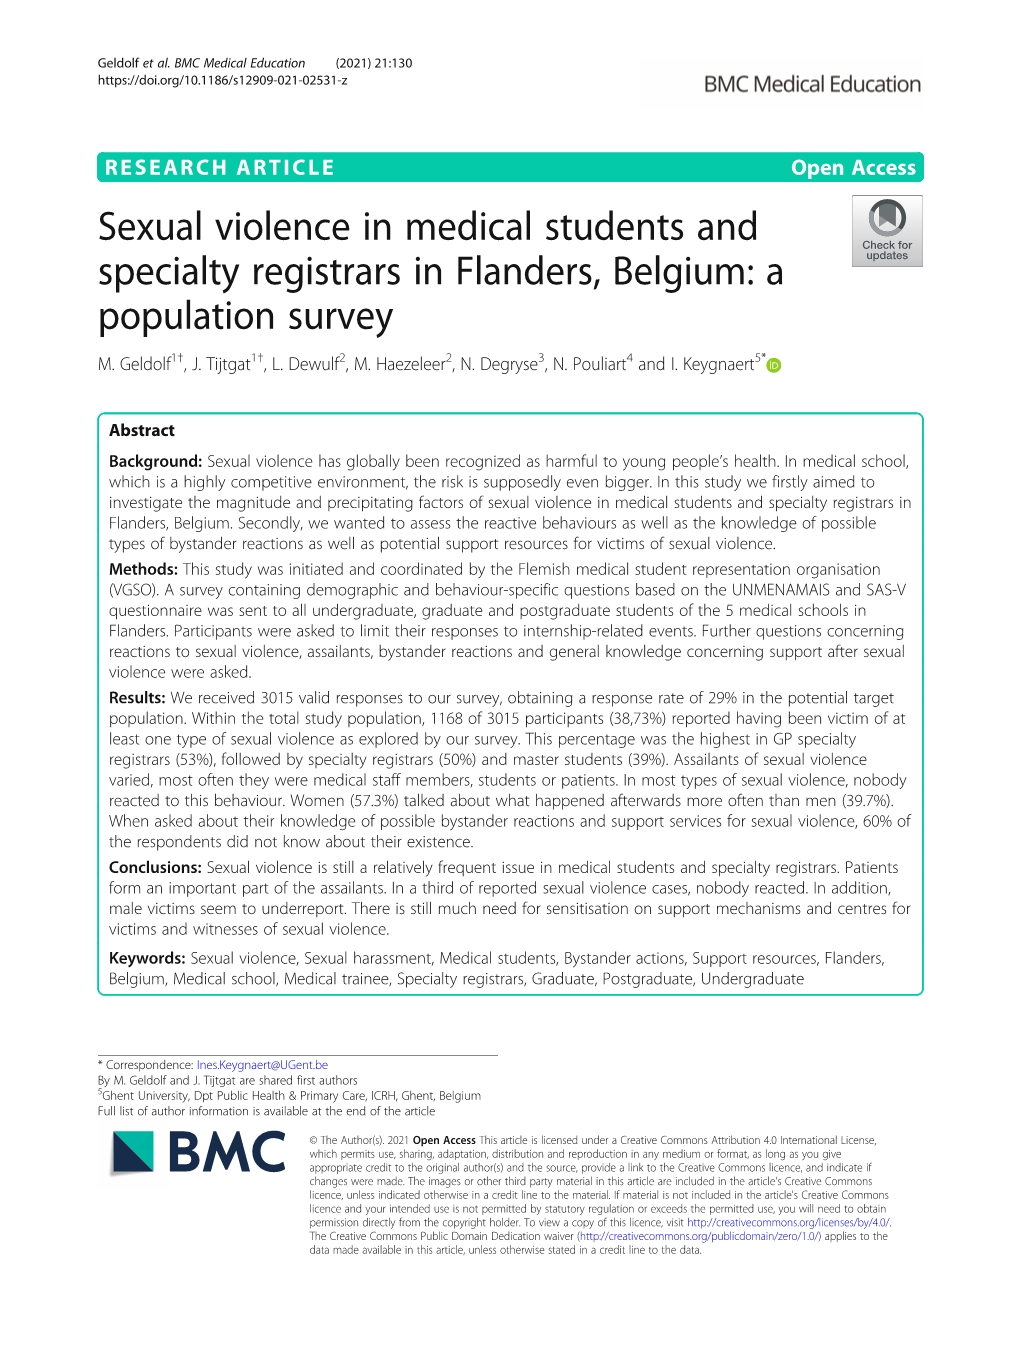 Sexual Violence in Medical Students and Specialty Registrars in Flanders, Belgium: a Population Survey M